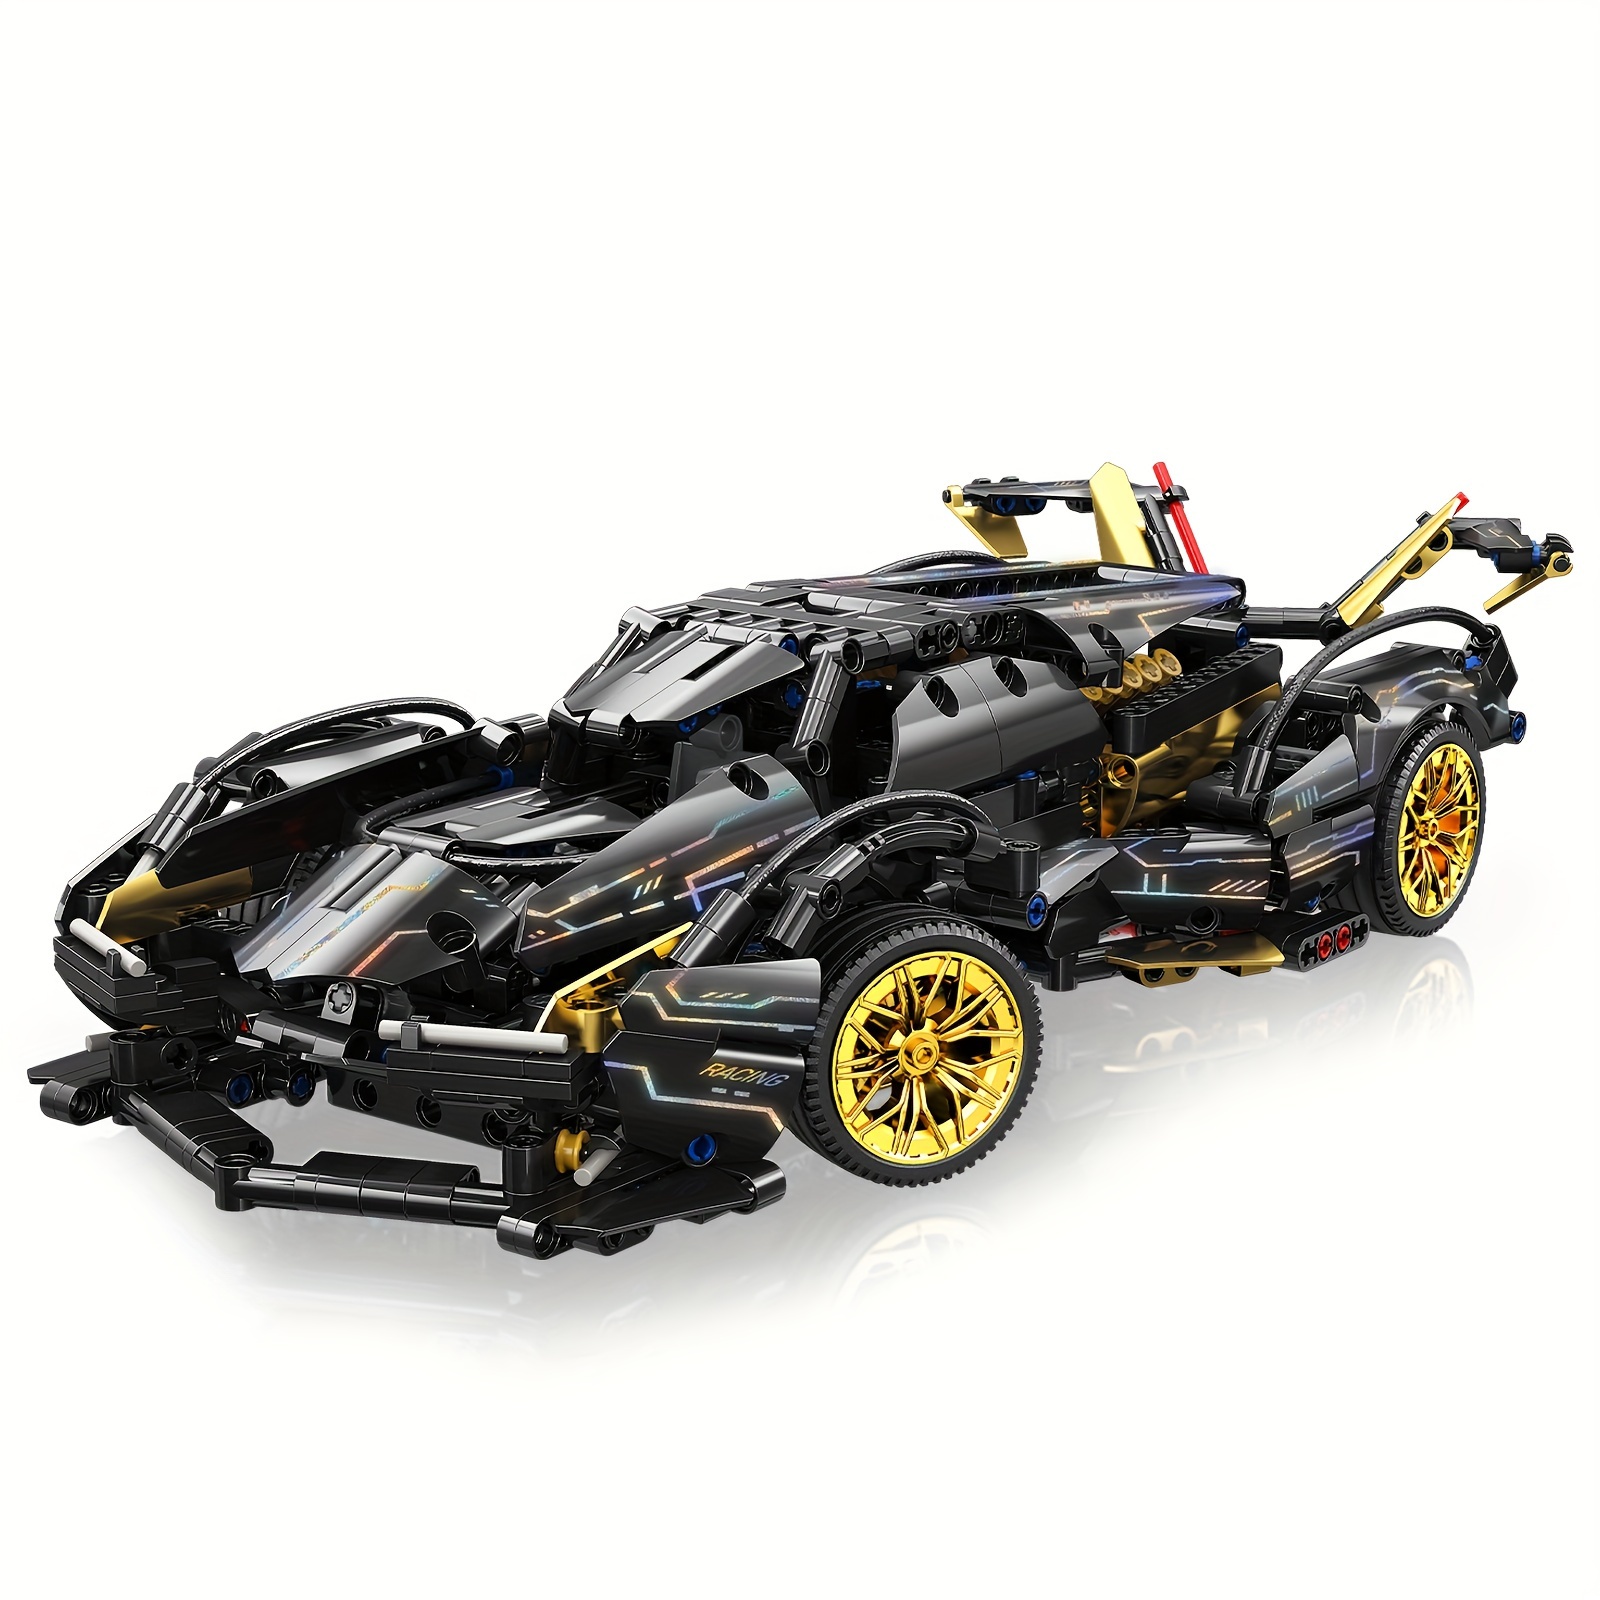 

1:14 Race Car Building Set Youth And Adult Collectible Car Models 1148 Pieces Building Blocks Puzzle Sports Car Toys Birthday Gift For Boys And Girls Enthusiasts 6+ Years Old